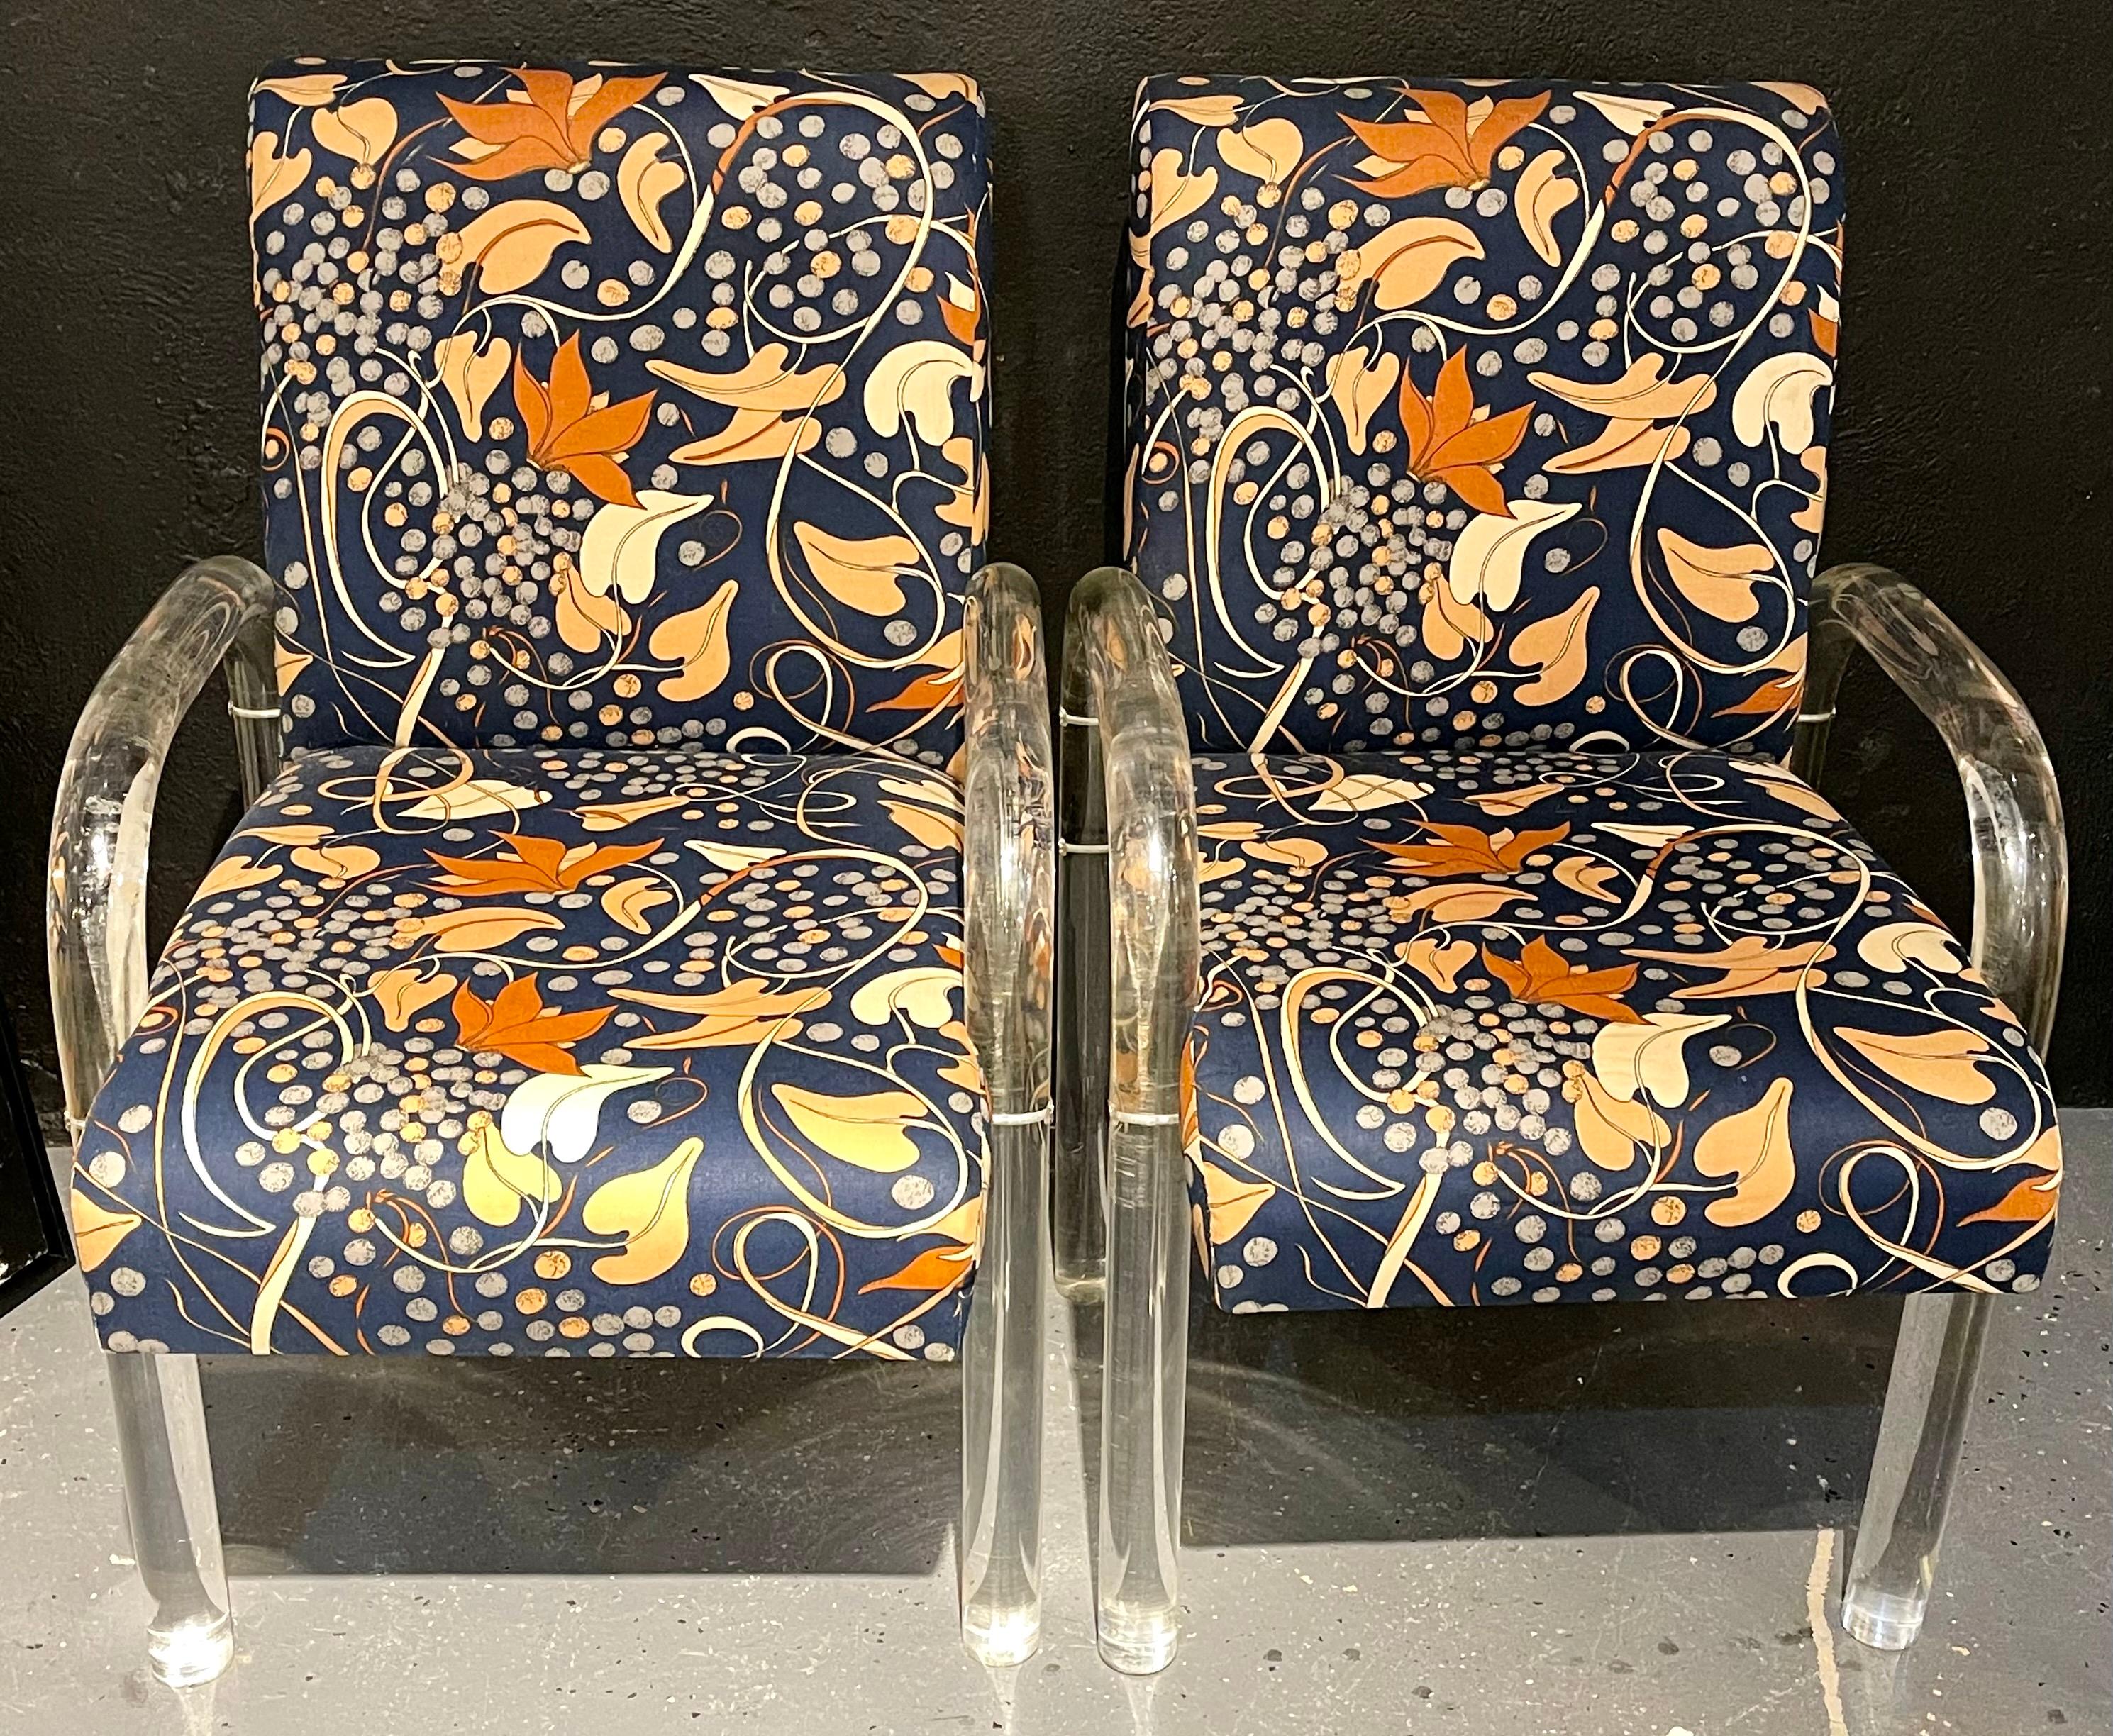 Set of 4 tubular Lucite dining chairs most likely by Lion in Frost. A timeless design of thick Lucite legs and sloped arms each in a lovey clean Floridian fabric. Can purchase one or all four as needed.